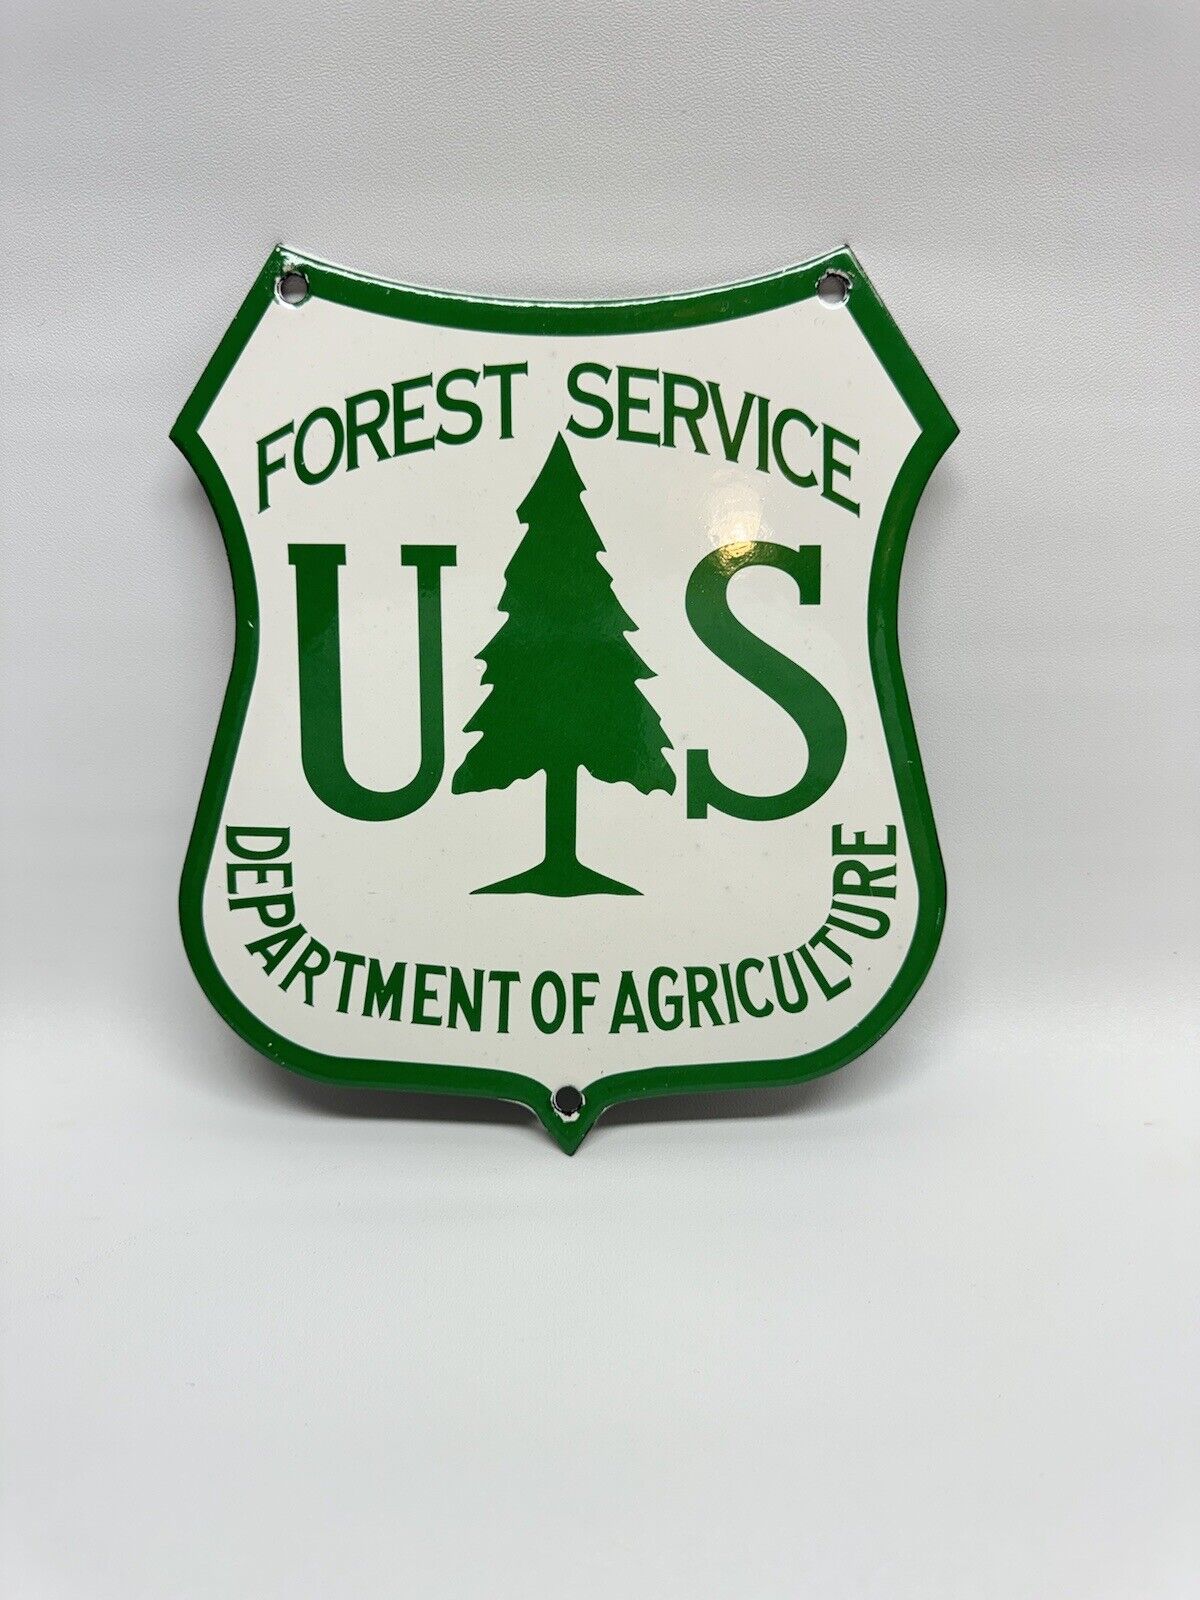 US FOREST SERVICE DEPARTMENT of AGRICULTURE VINTAGE STYLE RETRO METAL SIGN